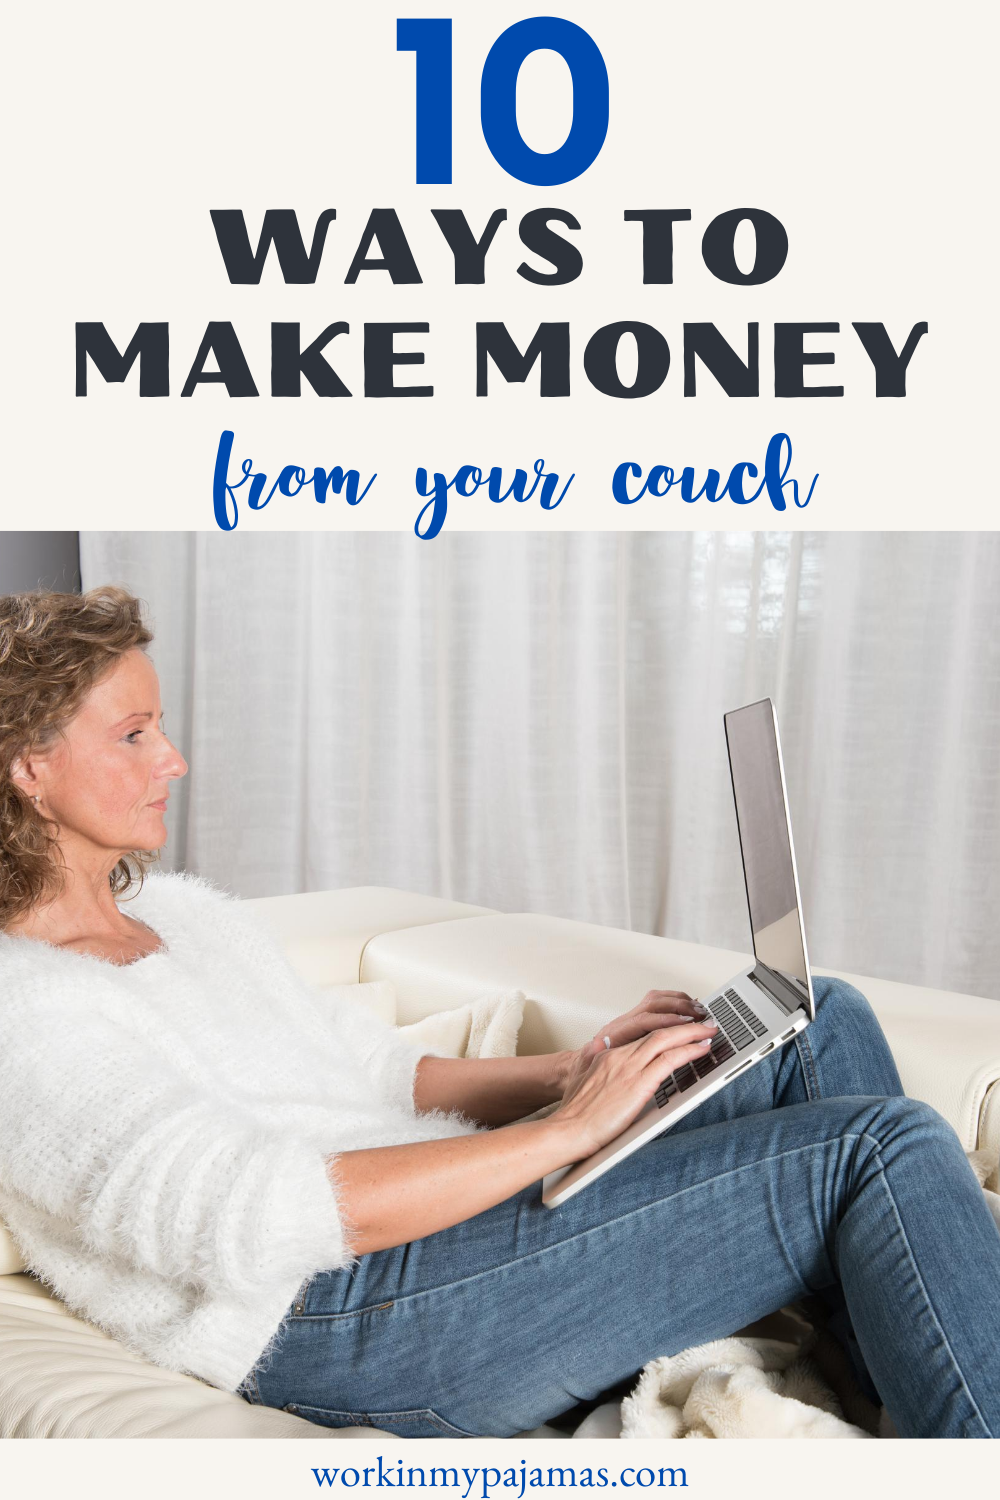 10 Ways To Make Money From Your Couch